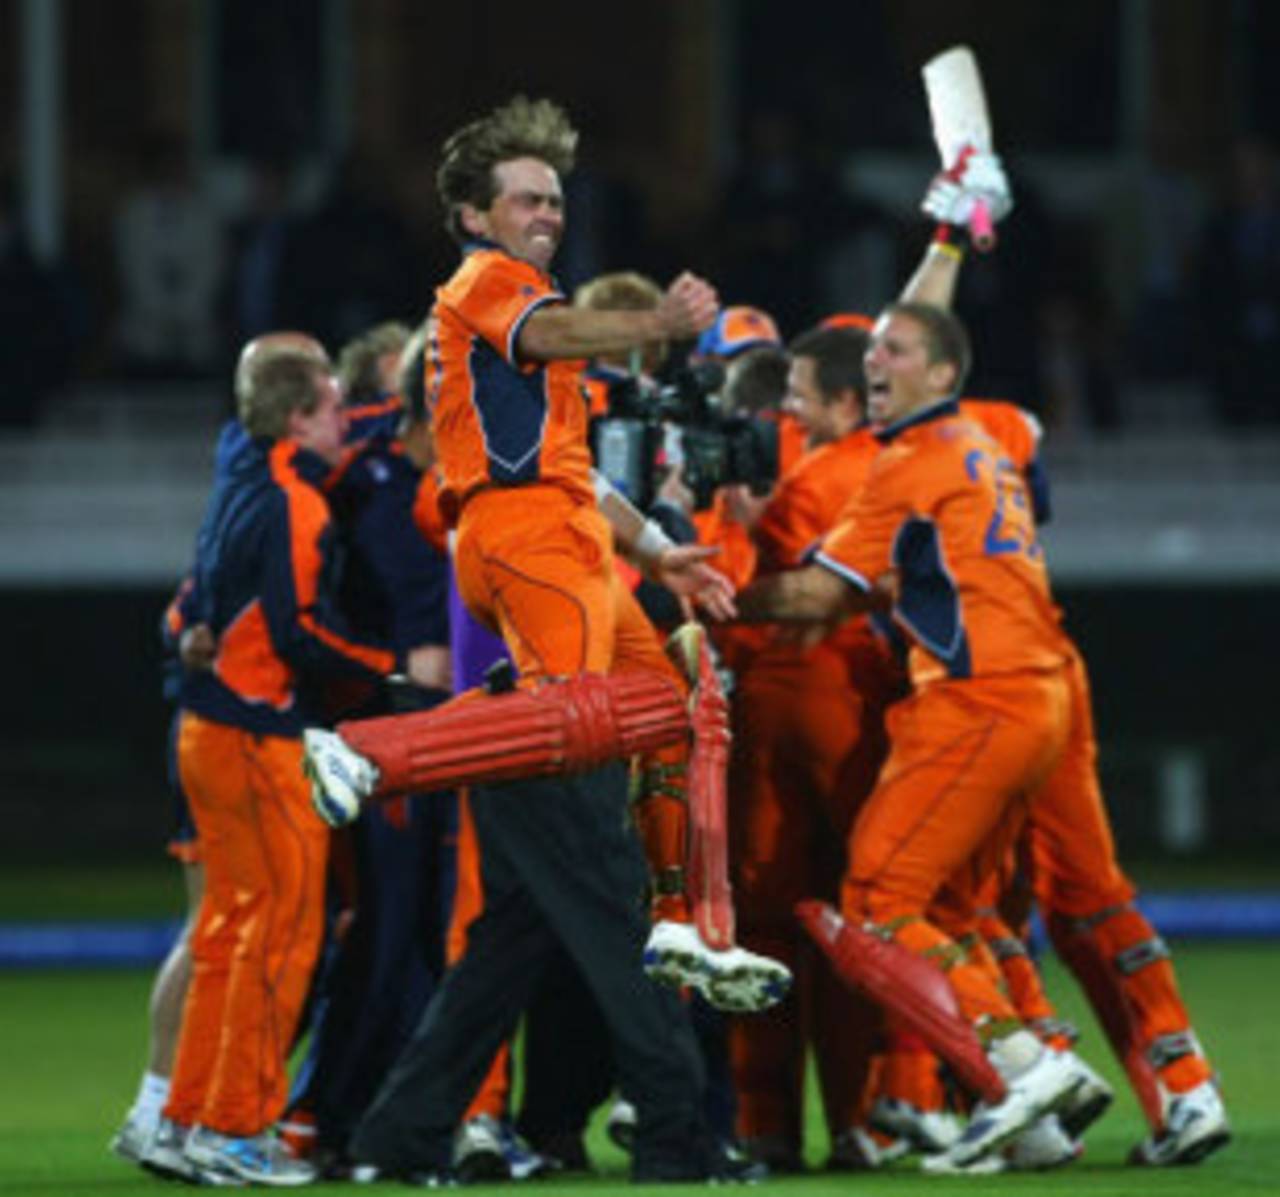 Jeroen Smits leaps for joy as Netherlands celebrate their dramatic last-ball win, England v Netherlands, ICC World Twenty20, Lord's, June 5, 2009